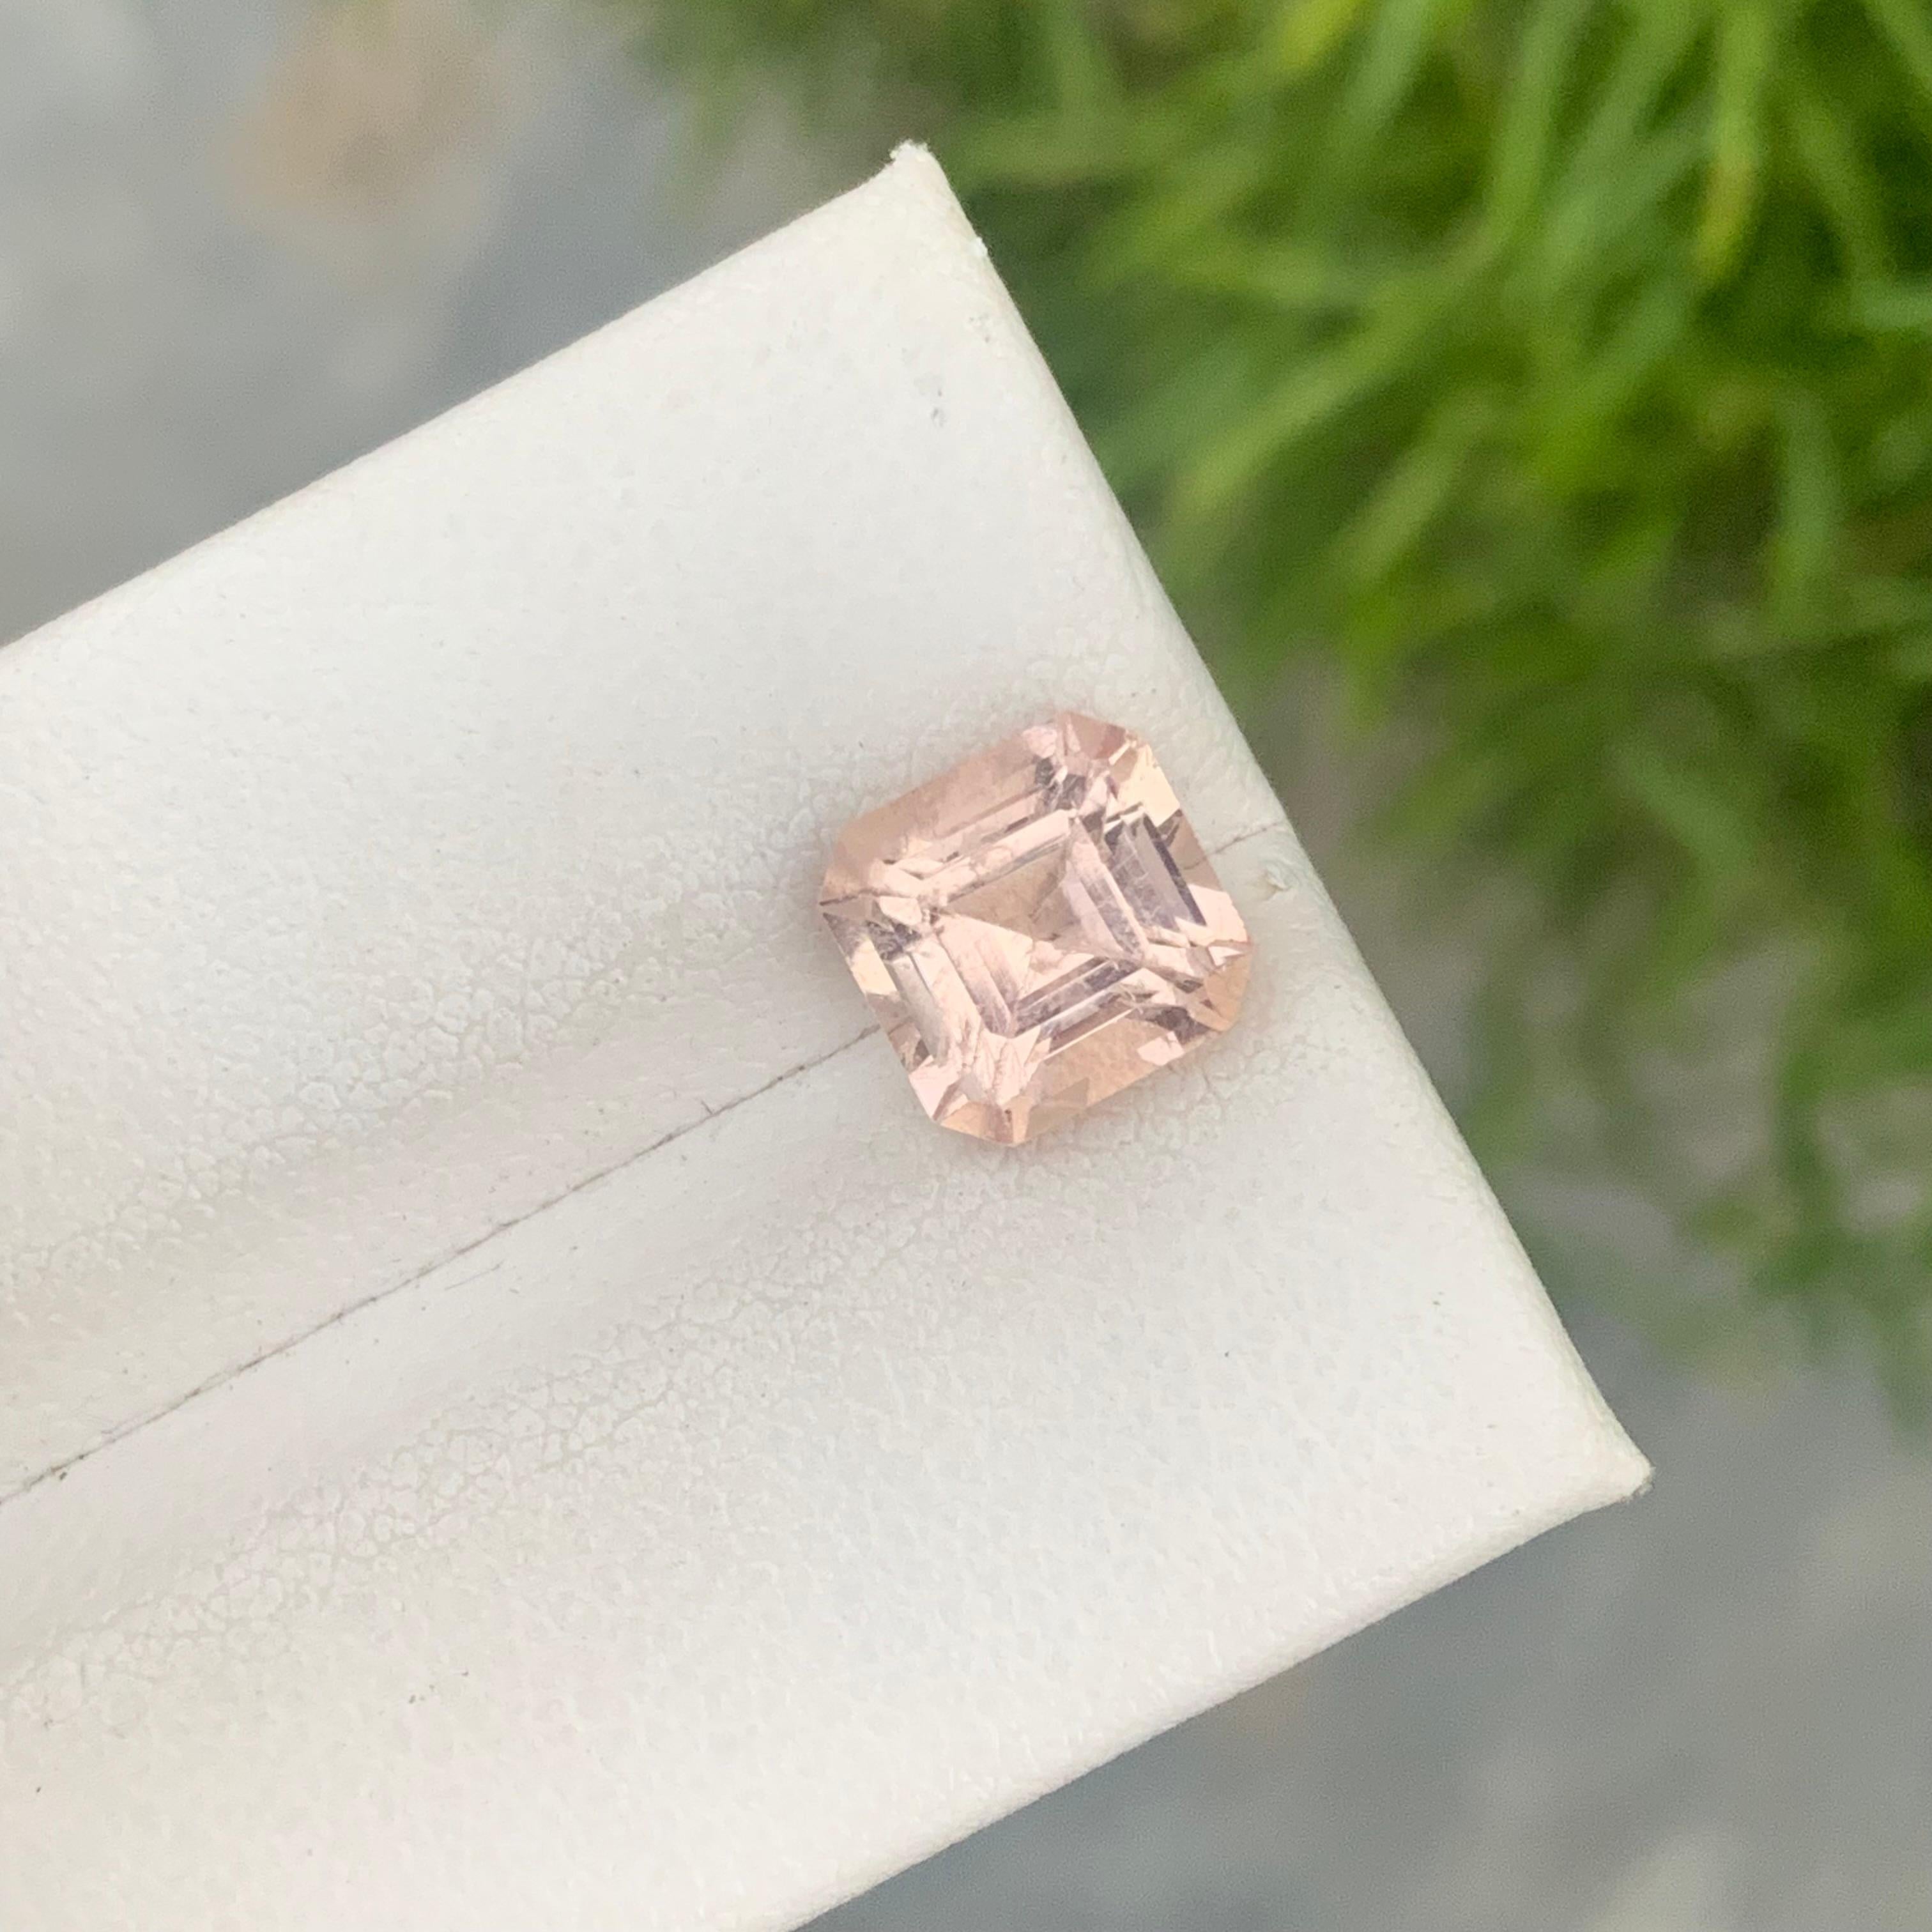 Gemstone Type : Morganite
Weight : 2.45 Carats
Dimensions : 7.7x7.6x6 Mm
Origin : Brazil
Clarity : Included
Shape: Asscher Cut
Color: Peach
Certificate: On Demand
Morganite is believed to bring healing, compassion and promise to those who wear it.